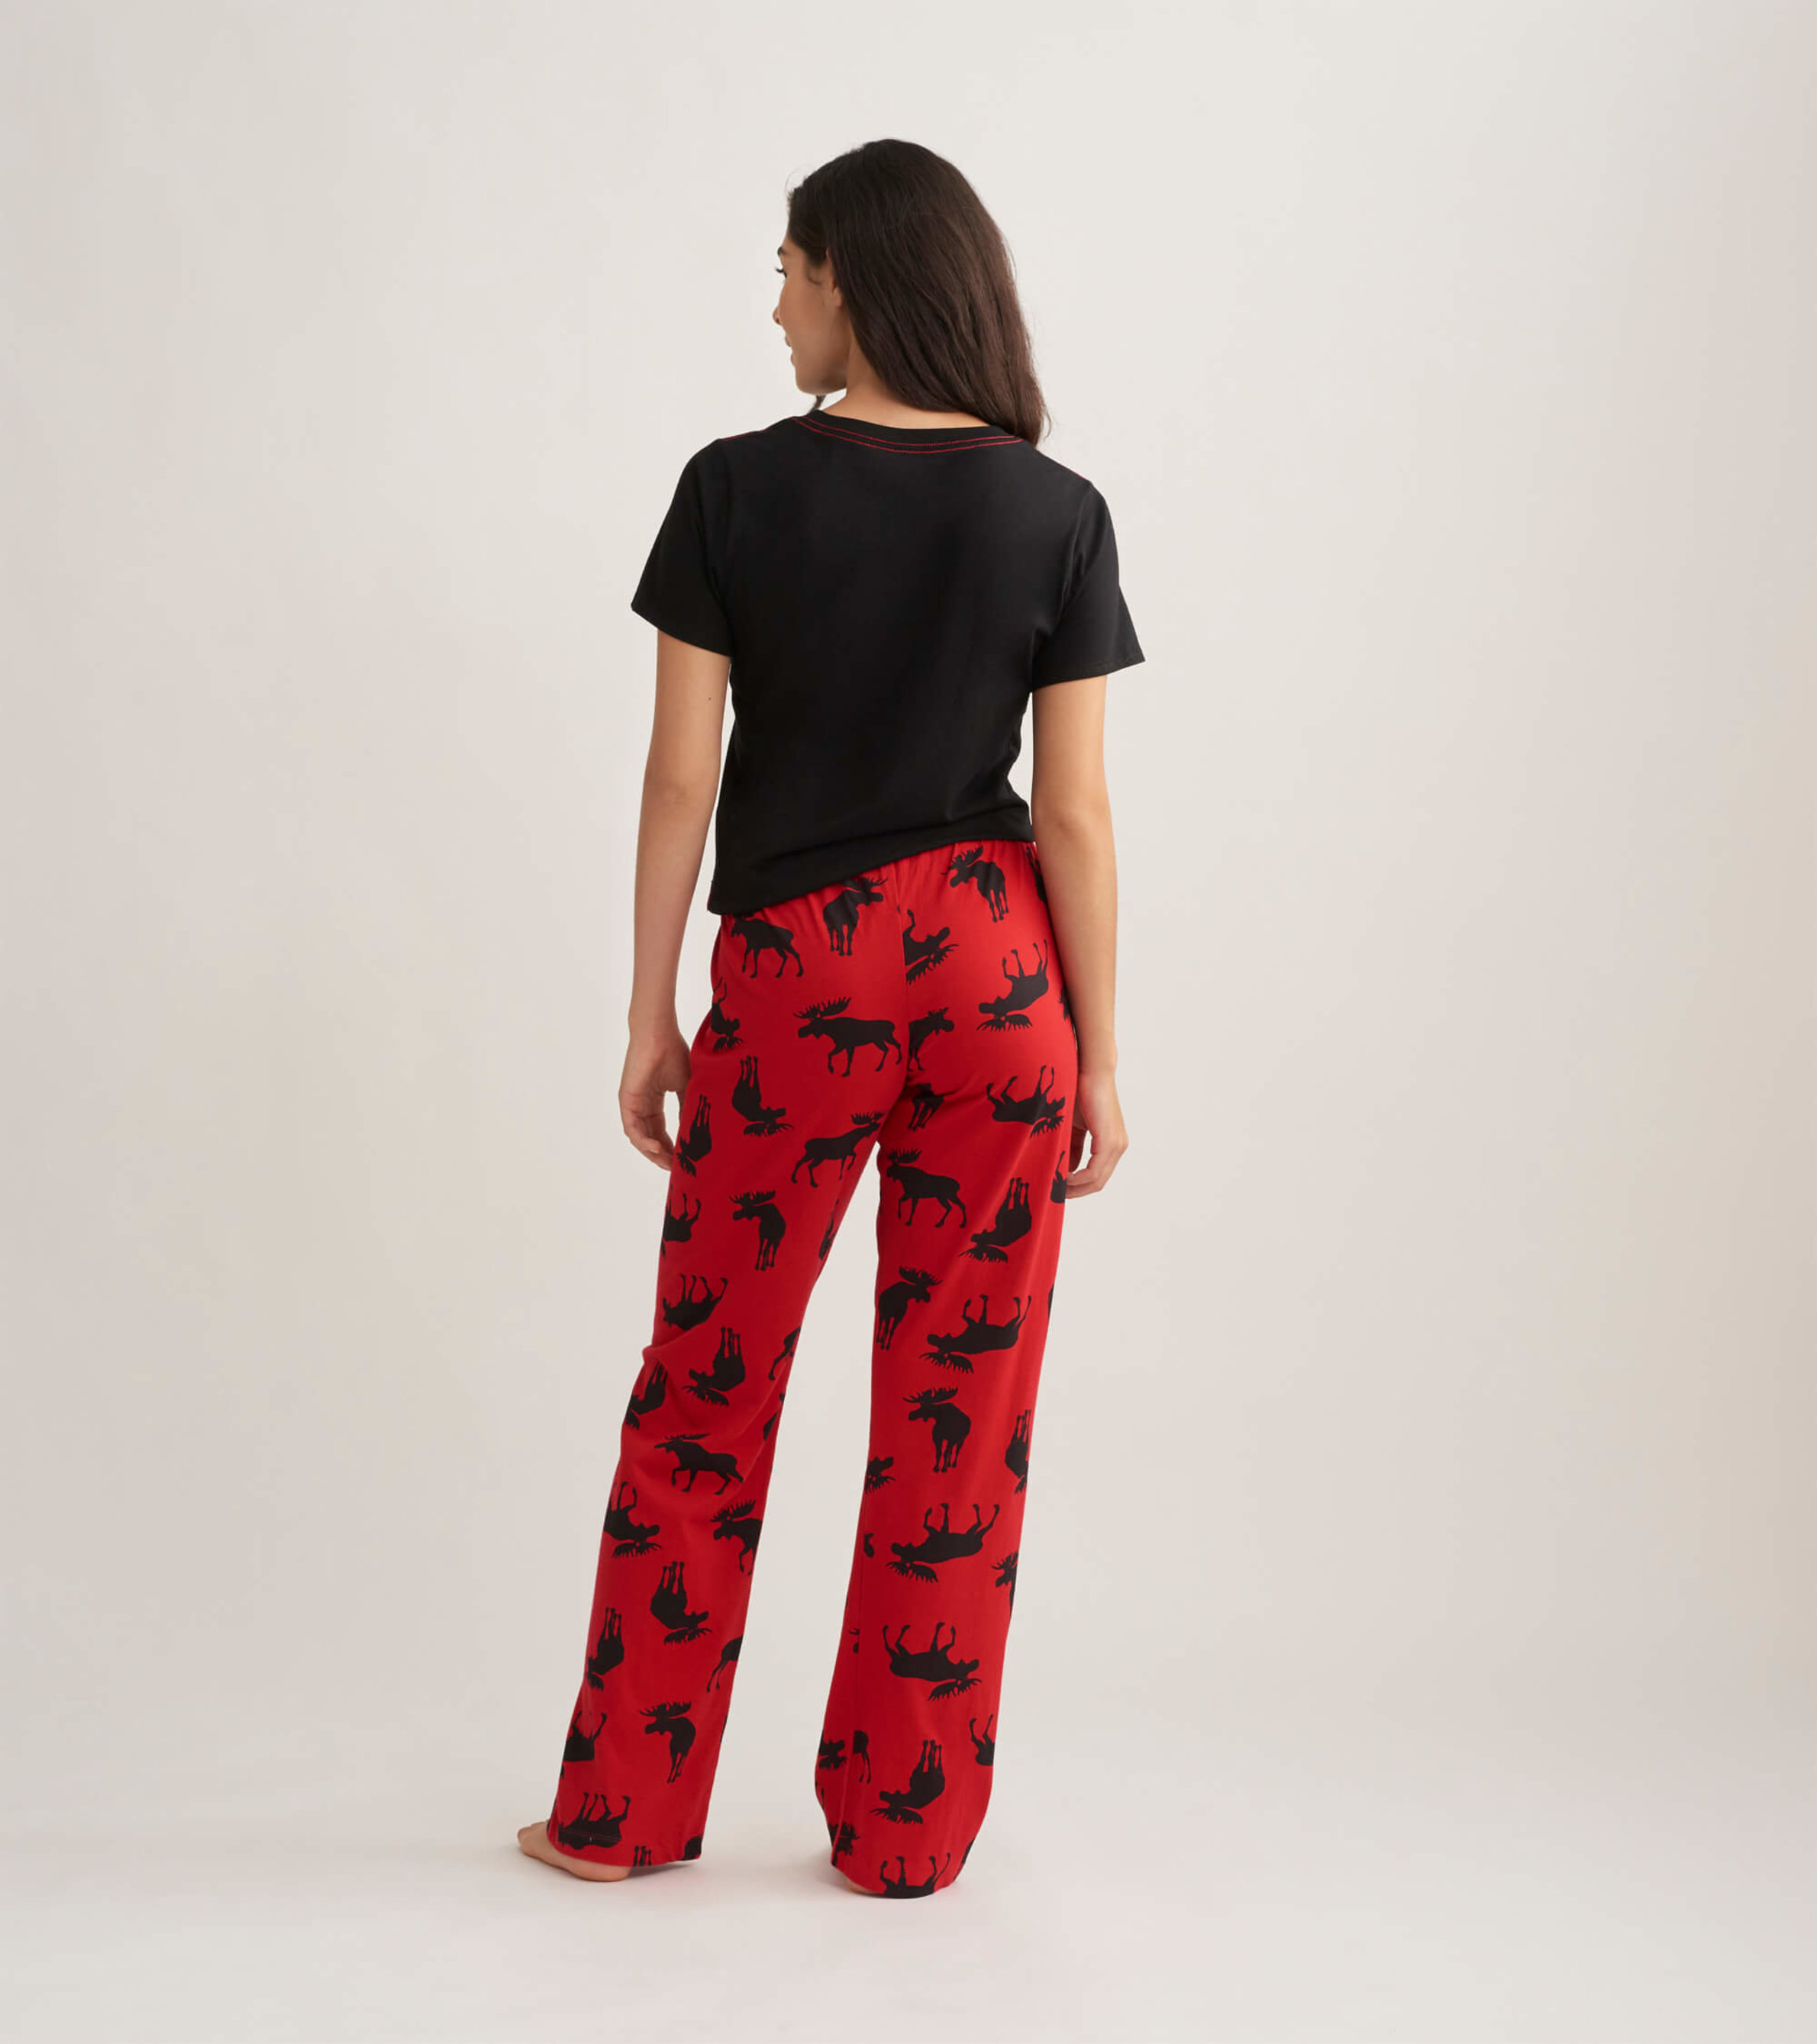 https://cdn.littlebluehouse.com/product_images/moose-on-red-womens-jersey-pajama-pants/PA2WIMO001_B_jpg/pdp_zoom.jpg?c=1604493259&locale=en